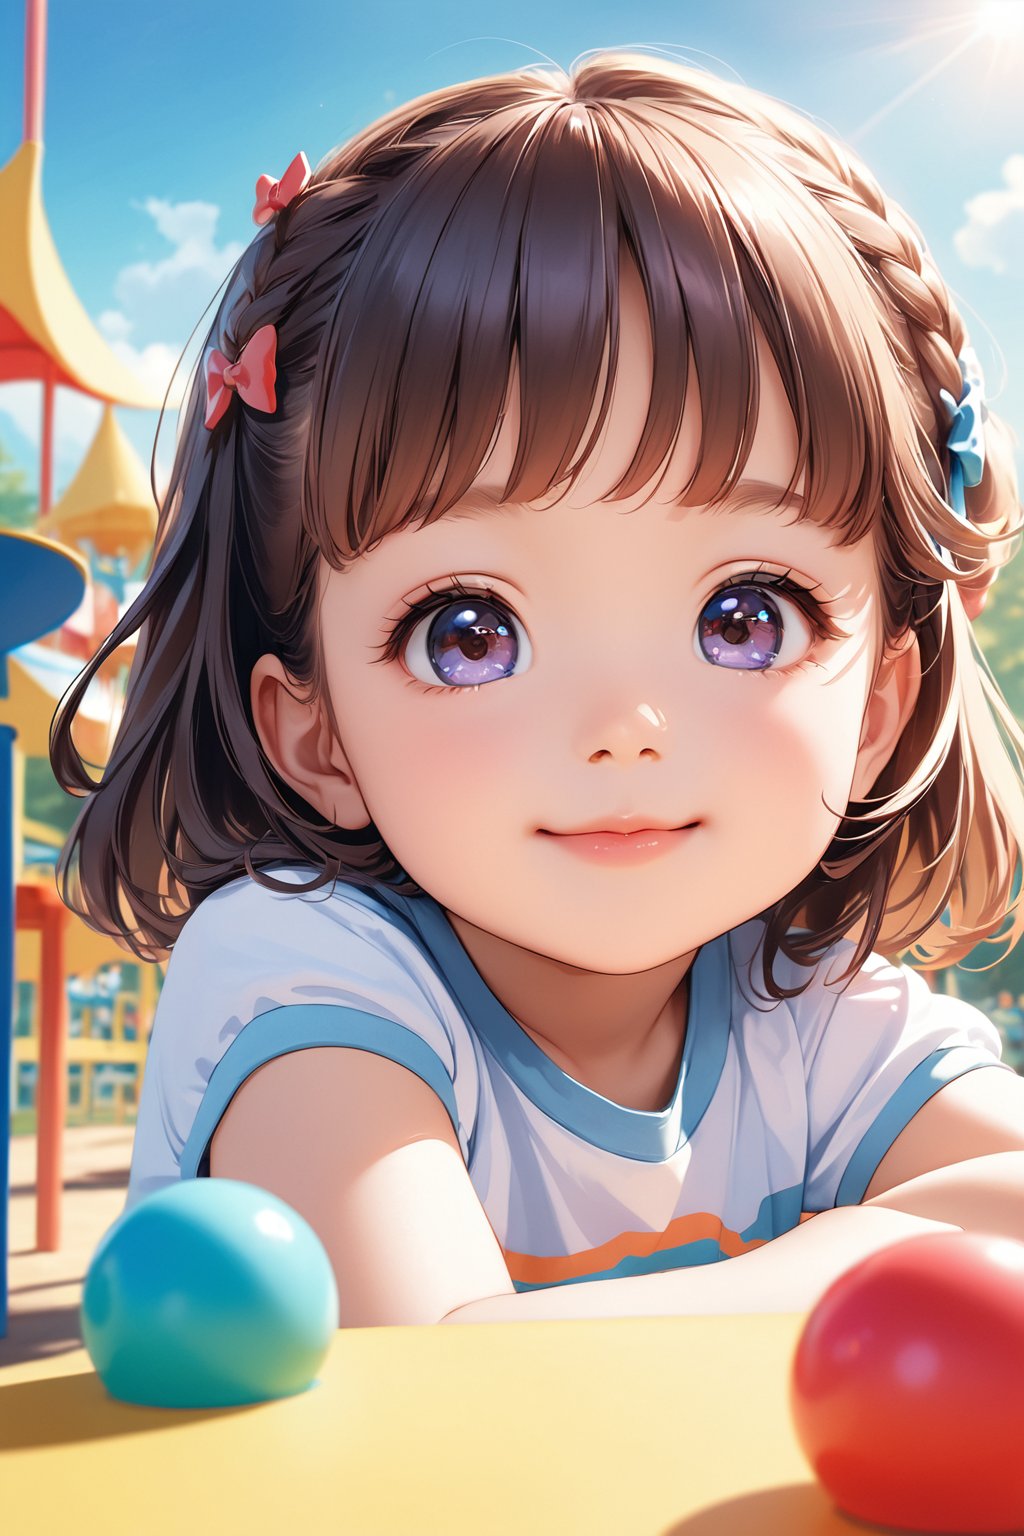 (best quality, highres), long brown hair,bow on head,girl,beautiful detailed eyes,beautiful detailed lips,long eyelashes,soft facial features, cute smile, looking at, a colorful playground with children playing, happiness, smiling, vibrant colors,pleasant lighting,artistic rendering,(The cutest girl in the world:1.5),